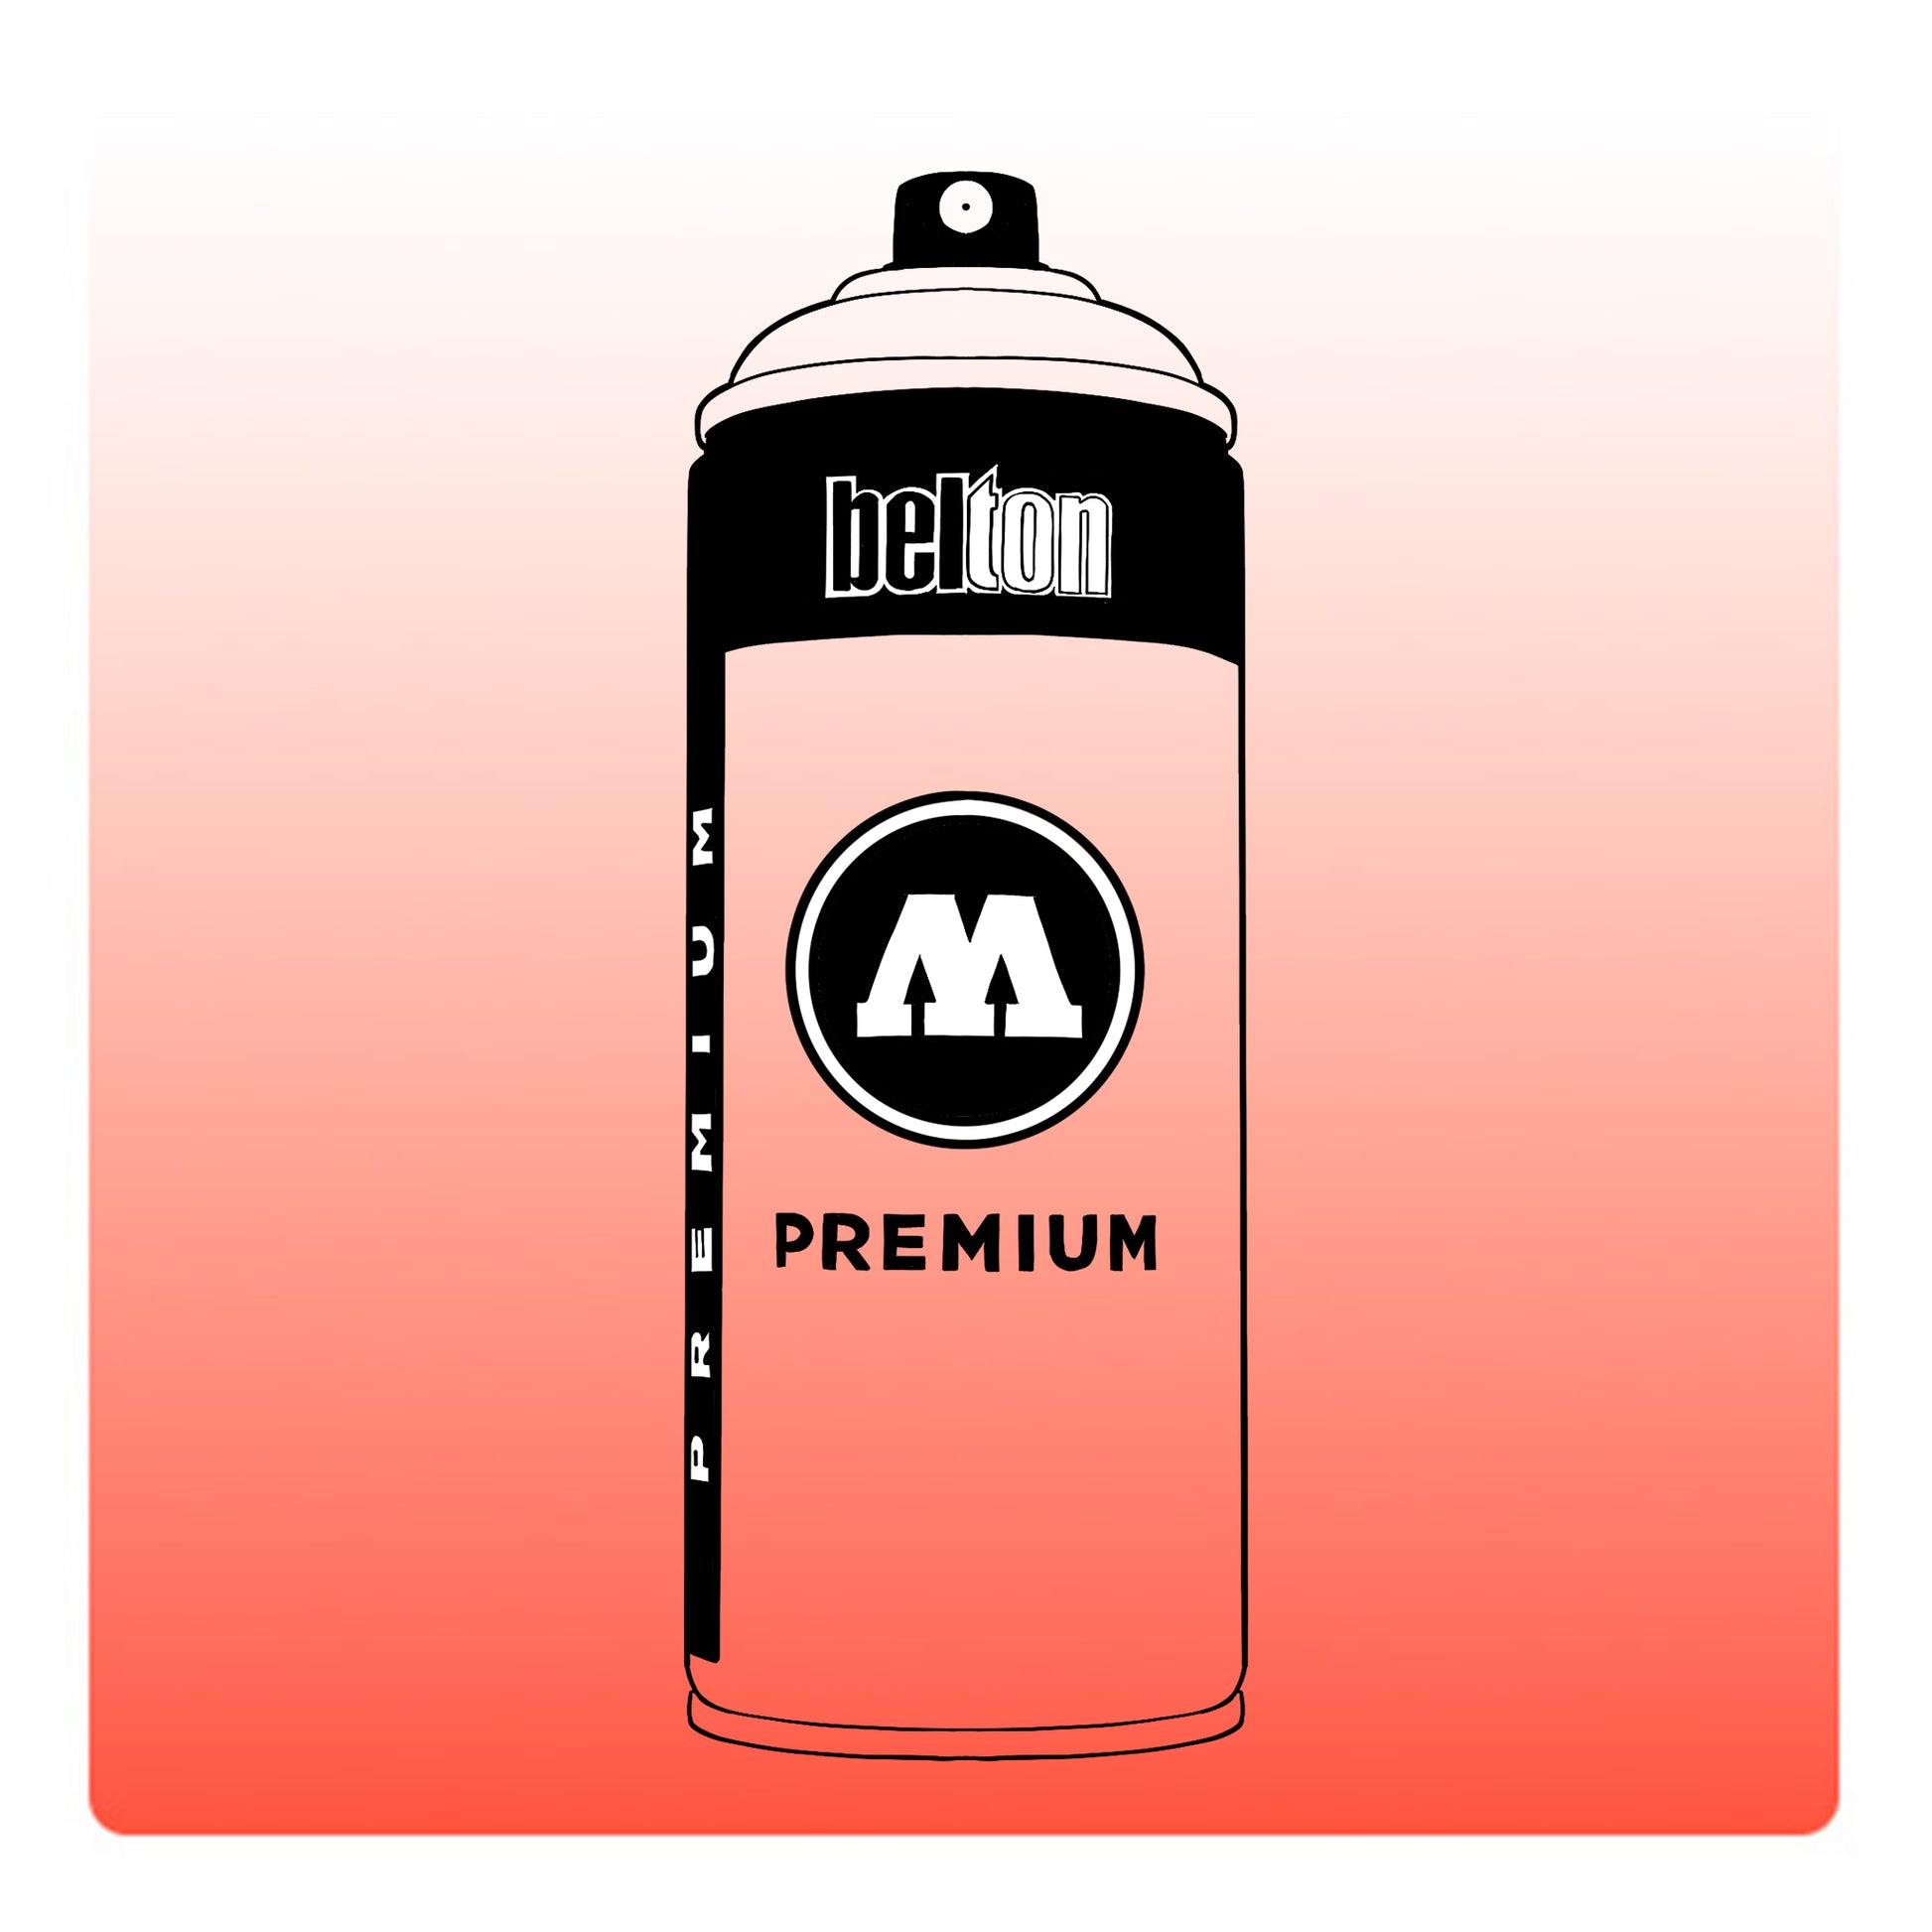 A line drawing of a spray paint can with a transparent, red color swatch.